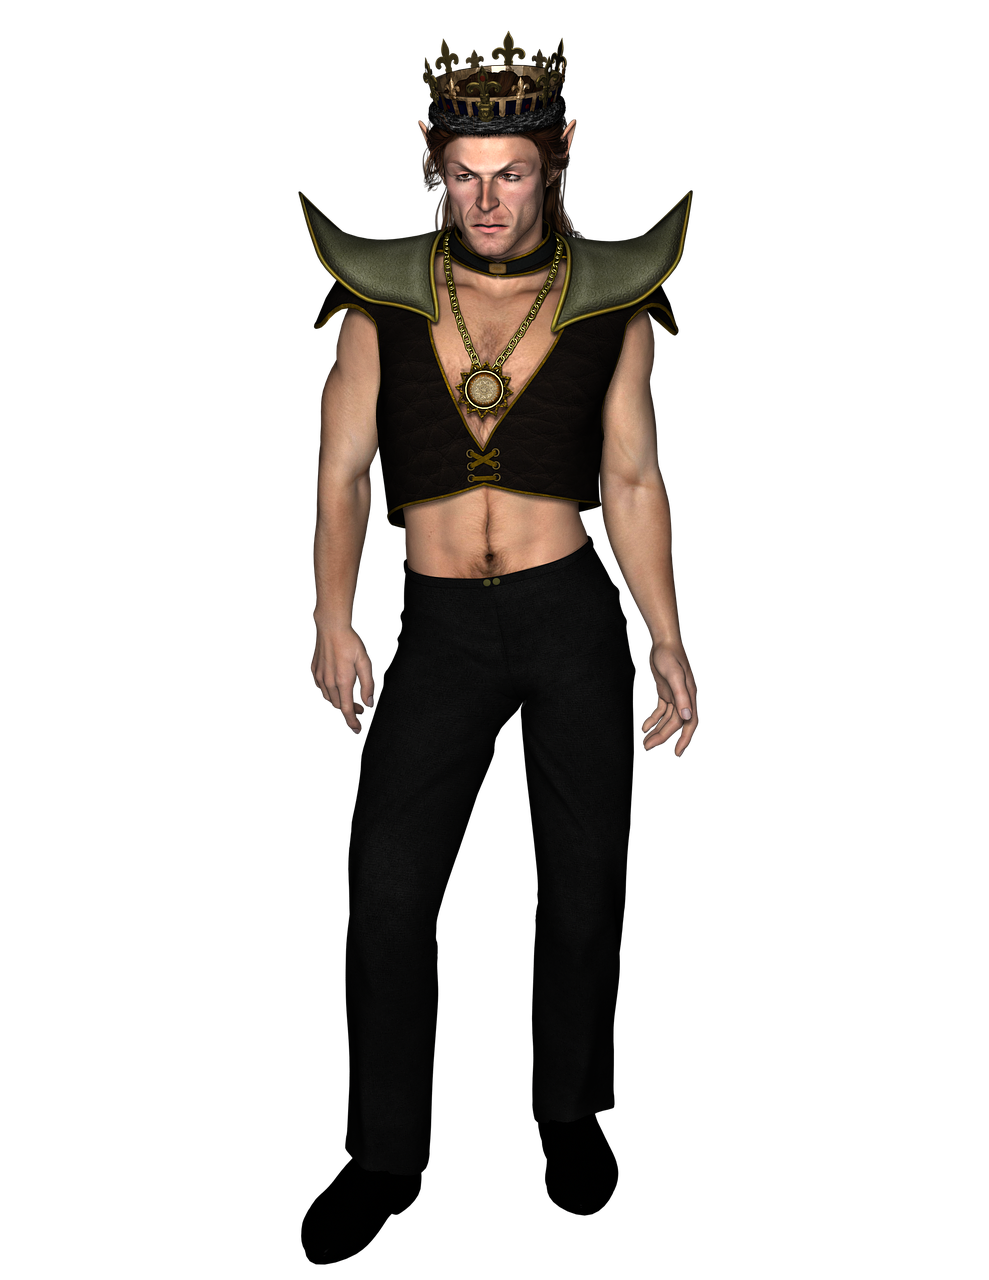 a man wearing a crown standing in front of a black background, inspired by Zoltan Boros, deviantart, modeled in poser, kefka ff6, ozymandias, fullbody photo